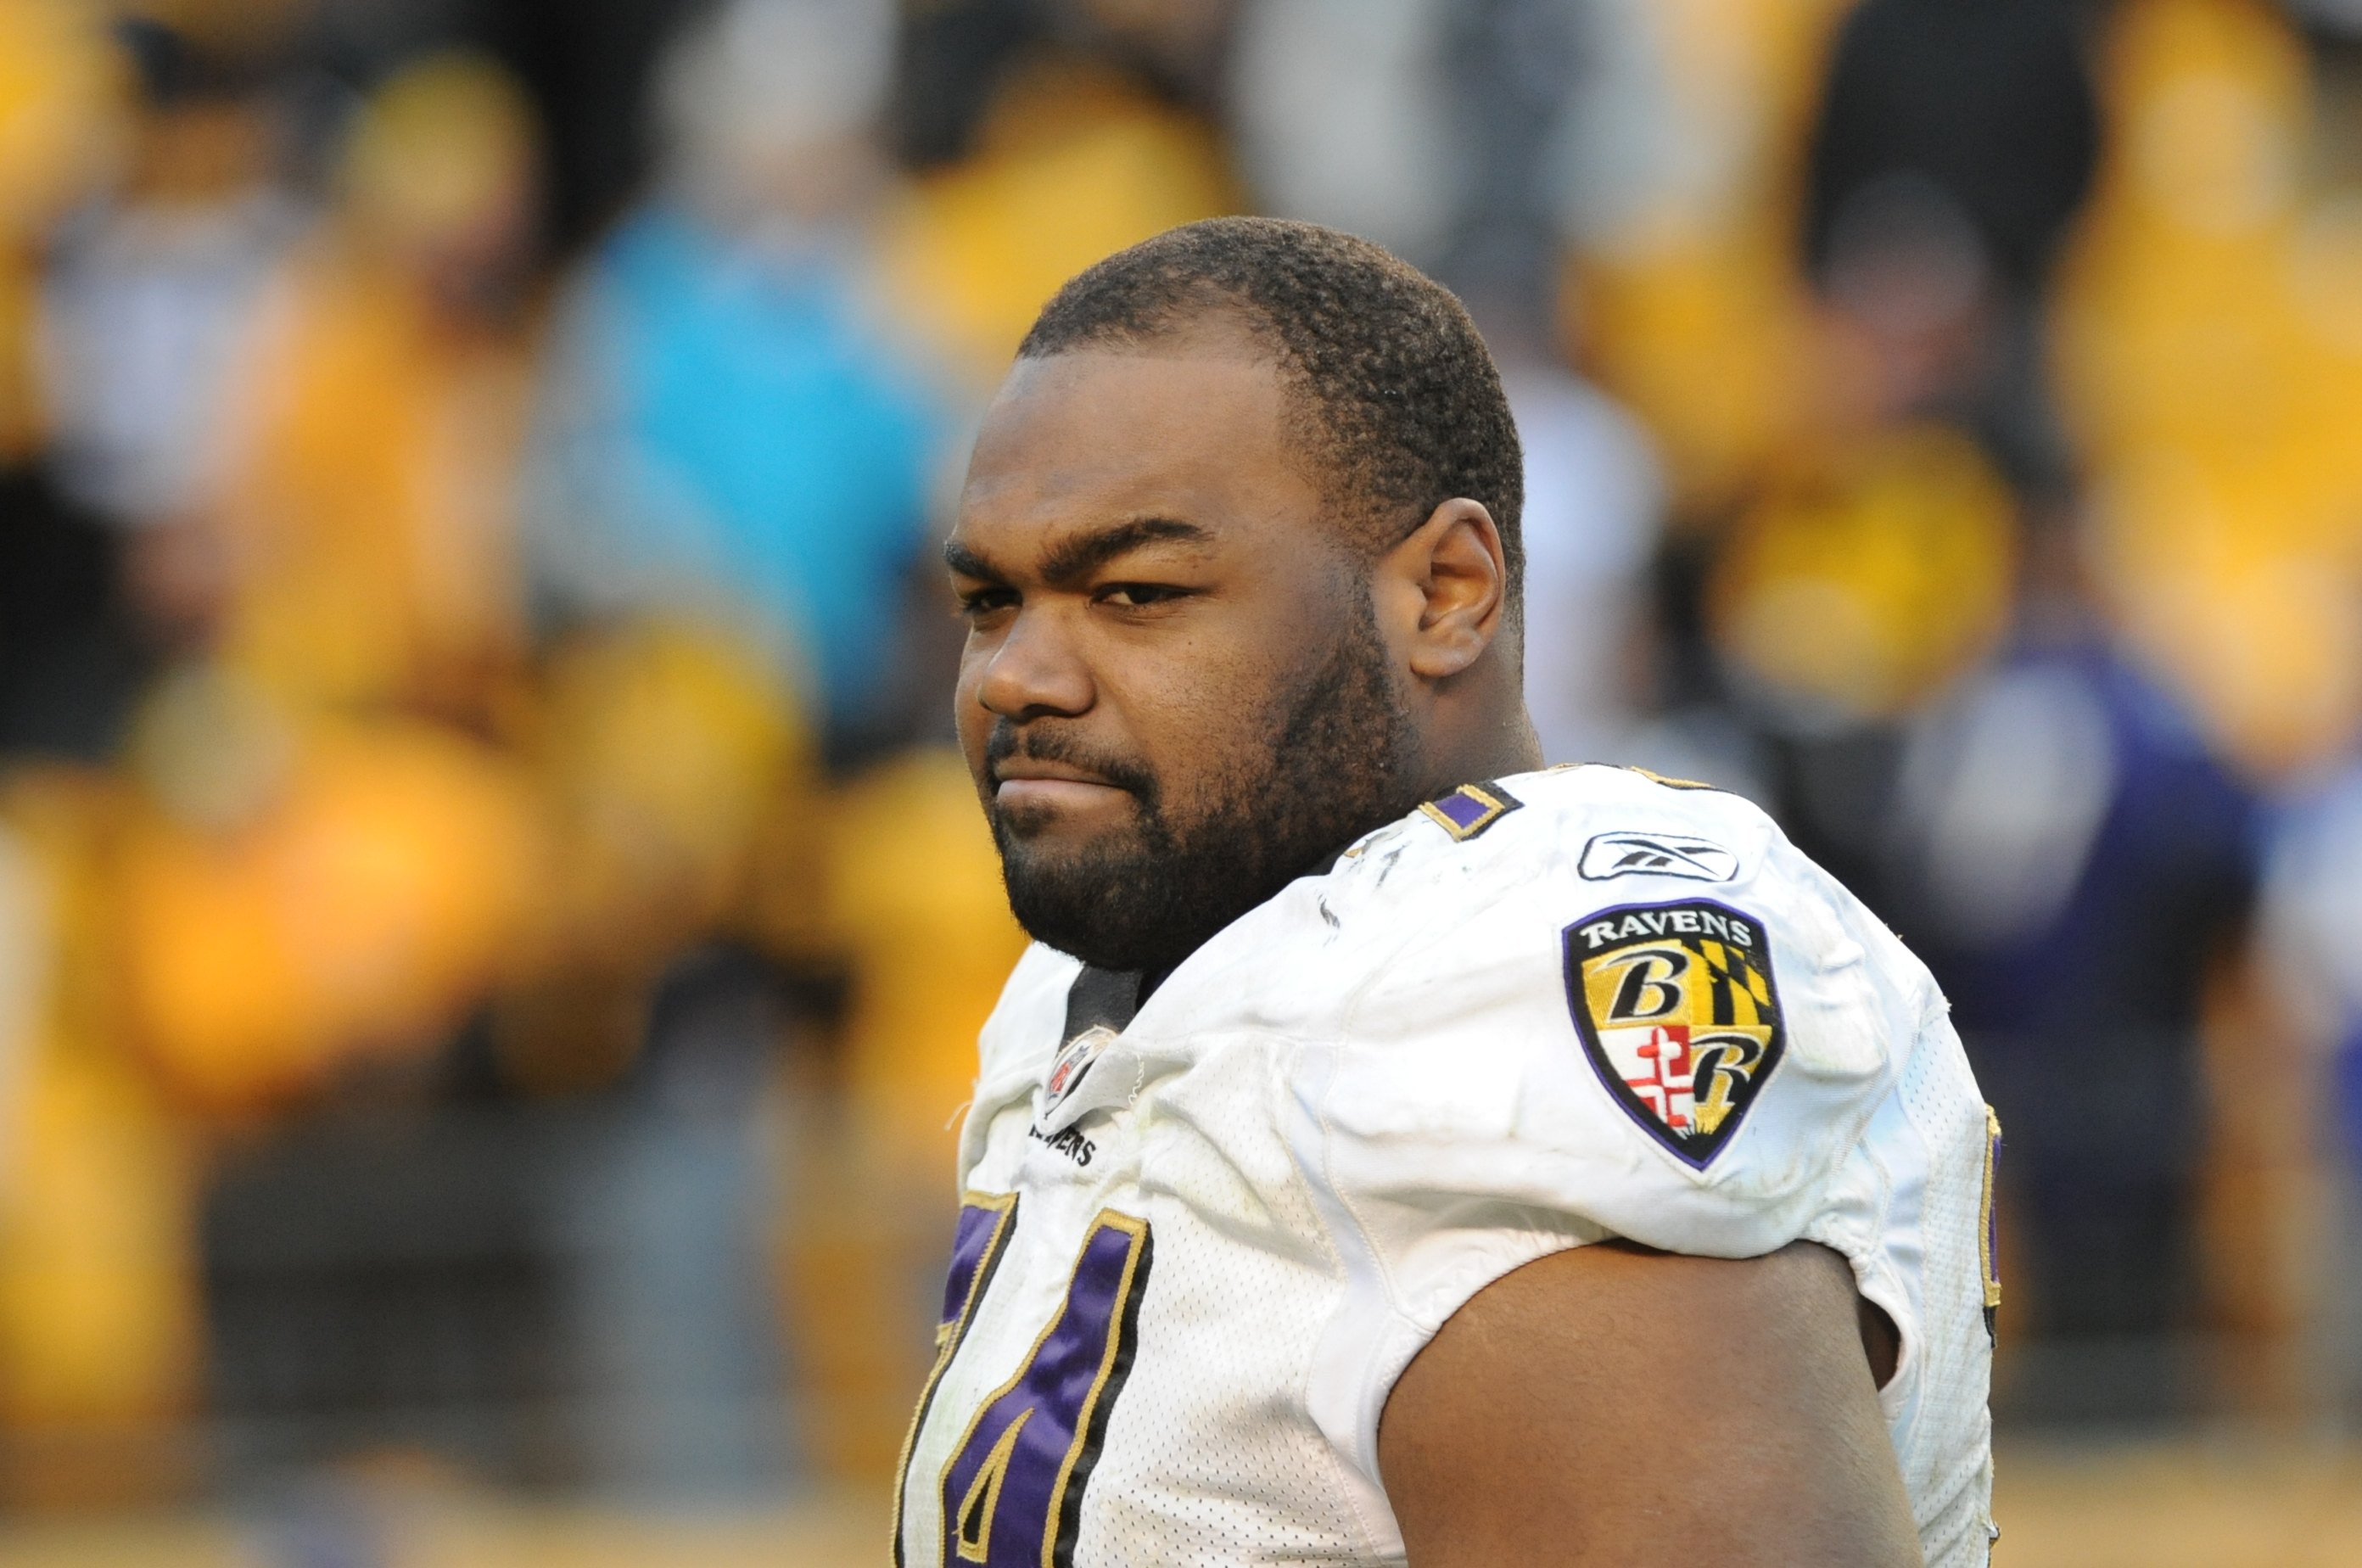 Michael Oher during a game at Heinz Field on December 27, 2009, in Pittsburgh, Pennsylvania. | Source: Getty Images